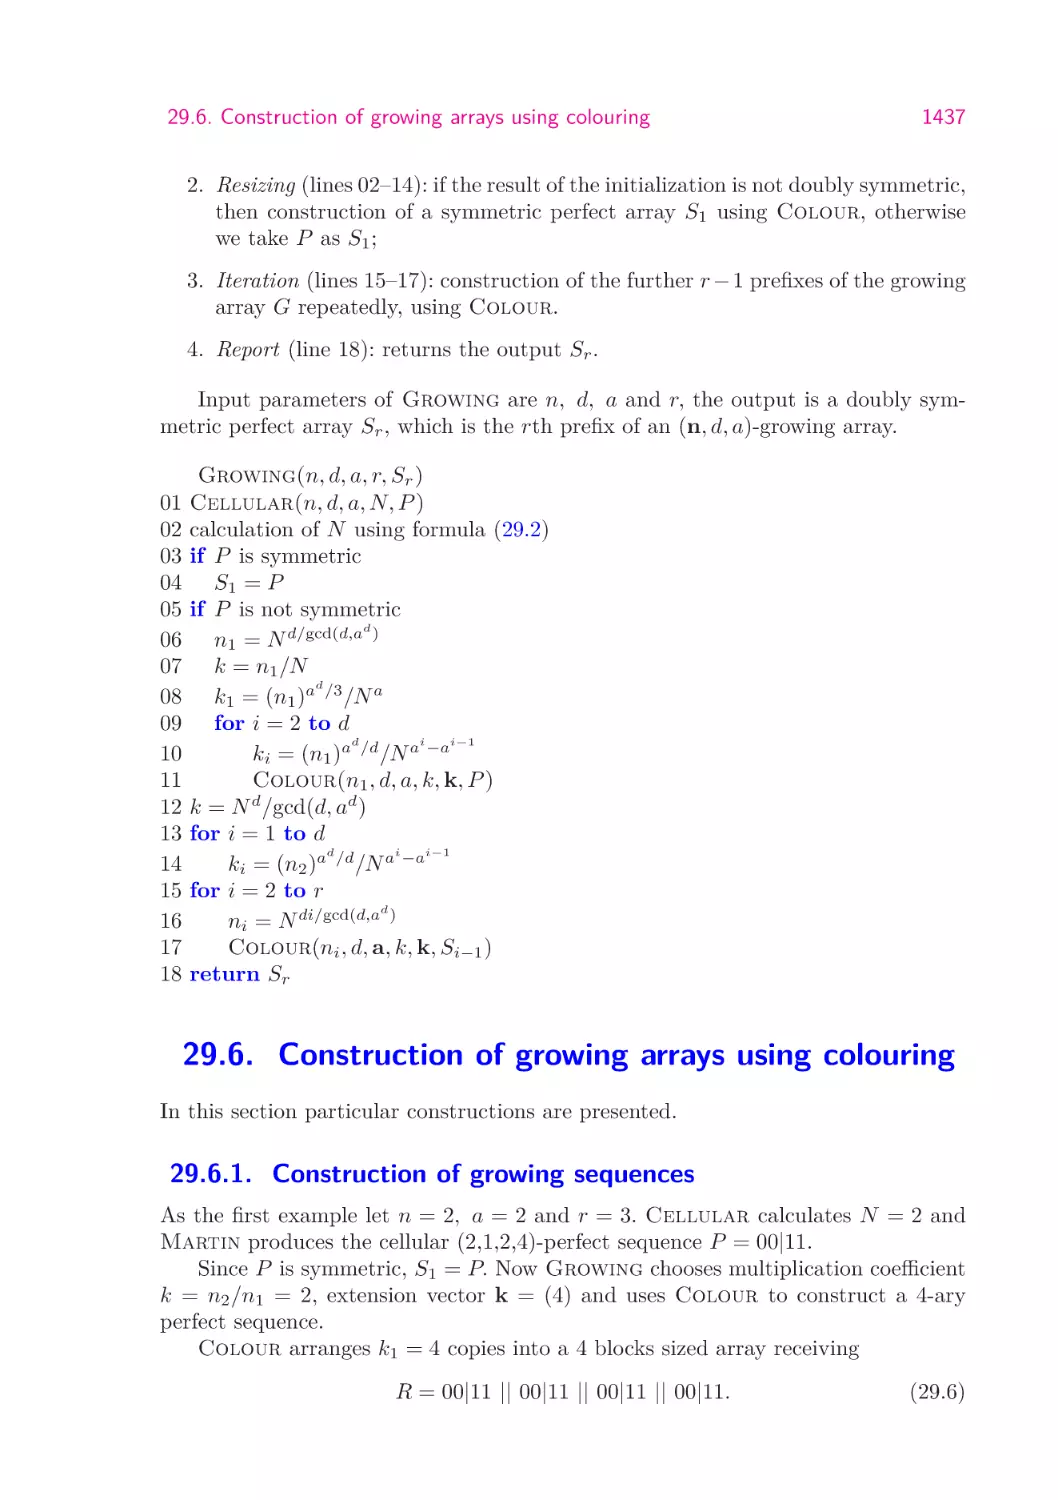 29.6.  Construction of growing arrays using colouring
29.6.1.  Construction of growing sequences